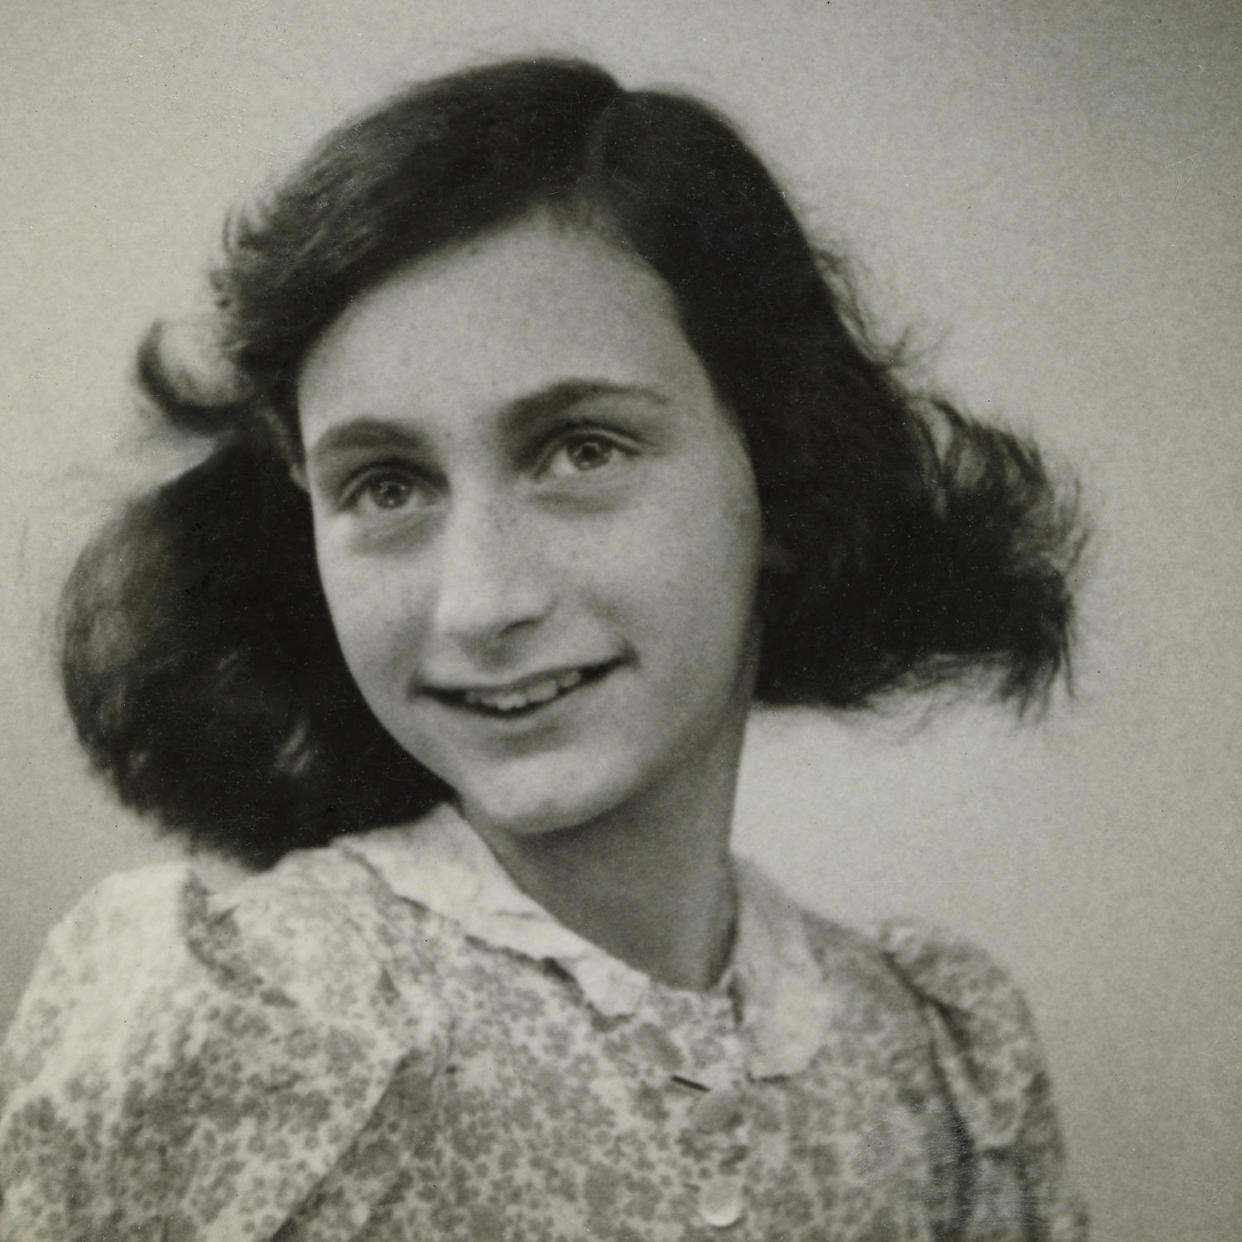 Anne Frank in 1942. (Anne Frank House via Flickr)